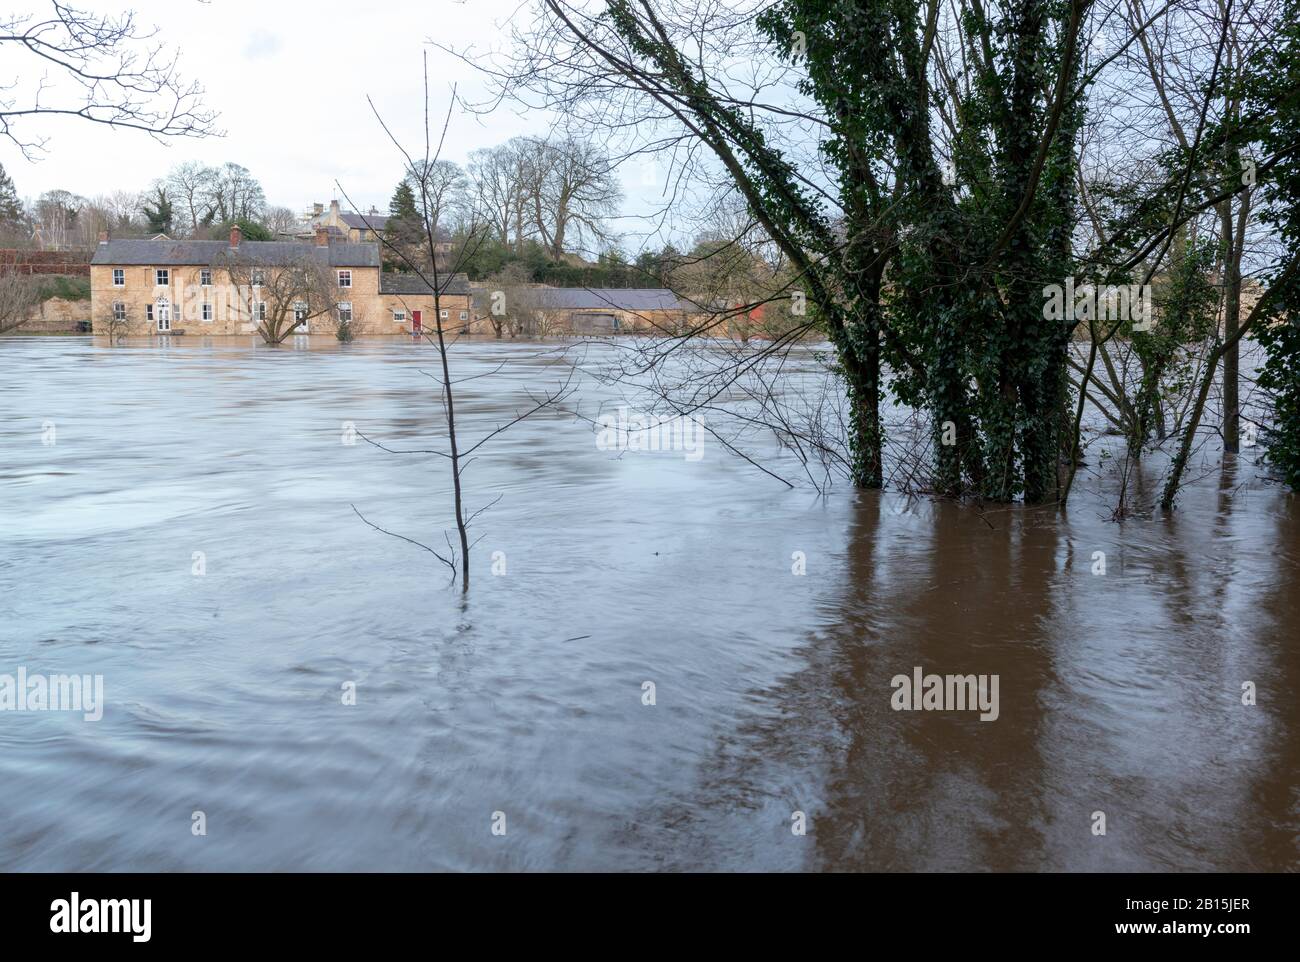 Floods on the River Wharfe at Thorp Arch reach the doors of a riverside farmhouse Stock Photo